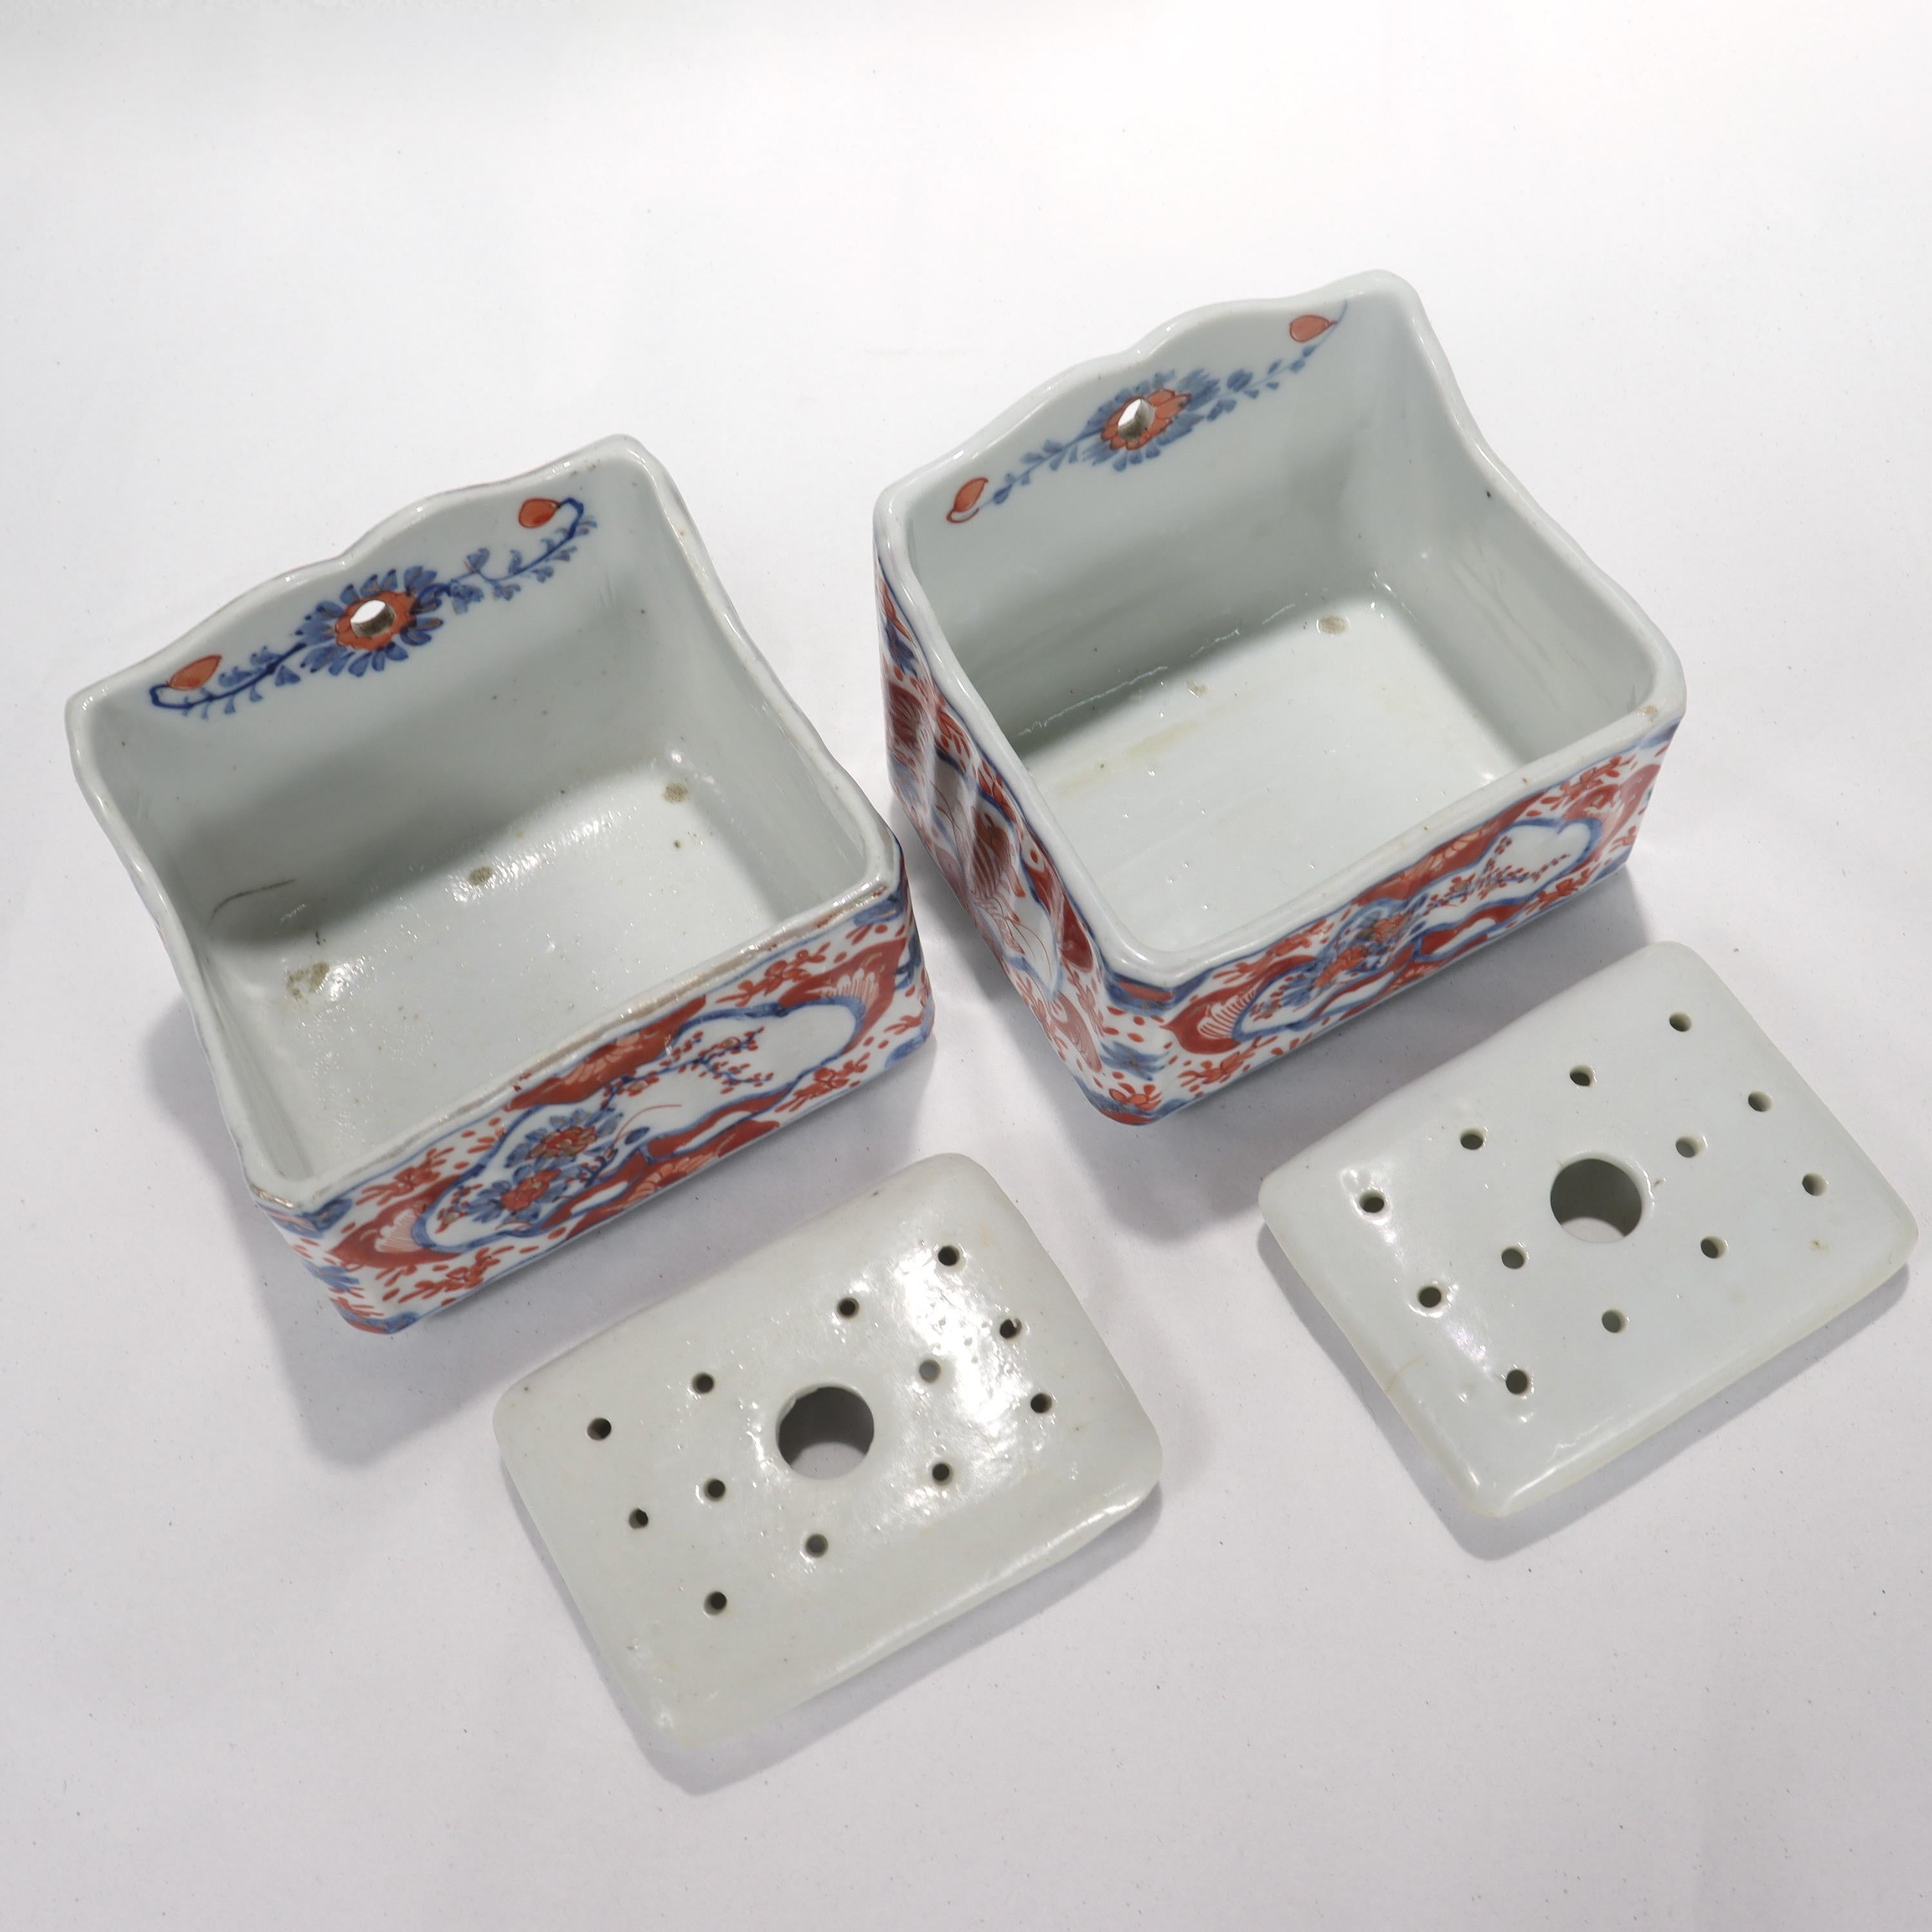 Pair of Old or Antique Japanese Imari Porcelain Soap Dishes For Sale 5